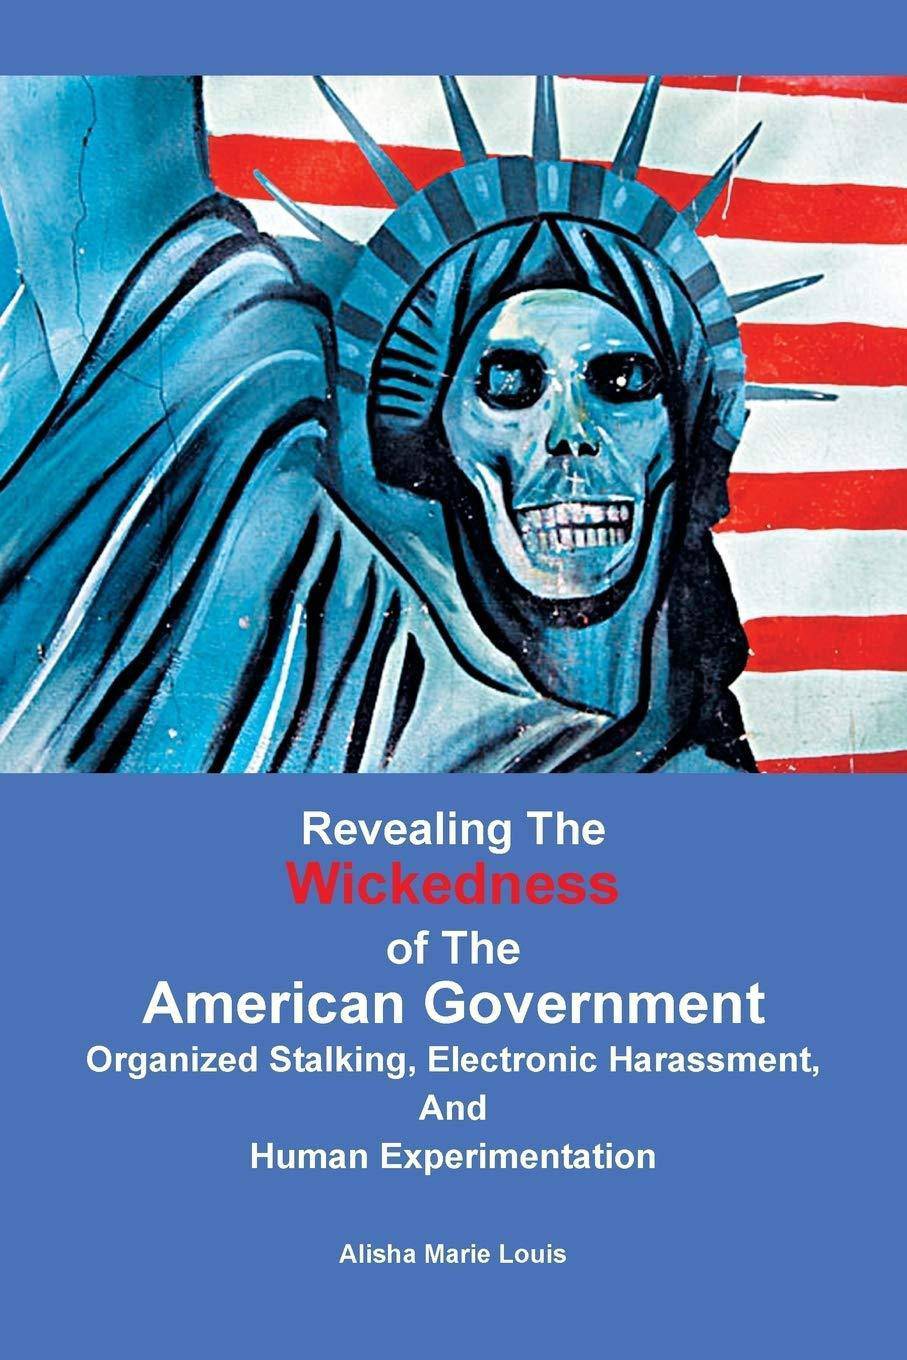 Revealing the Wickedness of the American Government - SureShot Books Publishing LLC